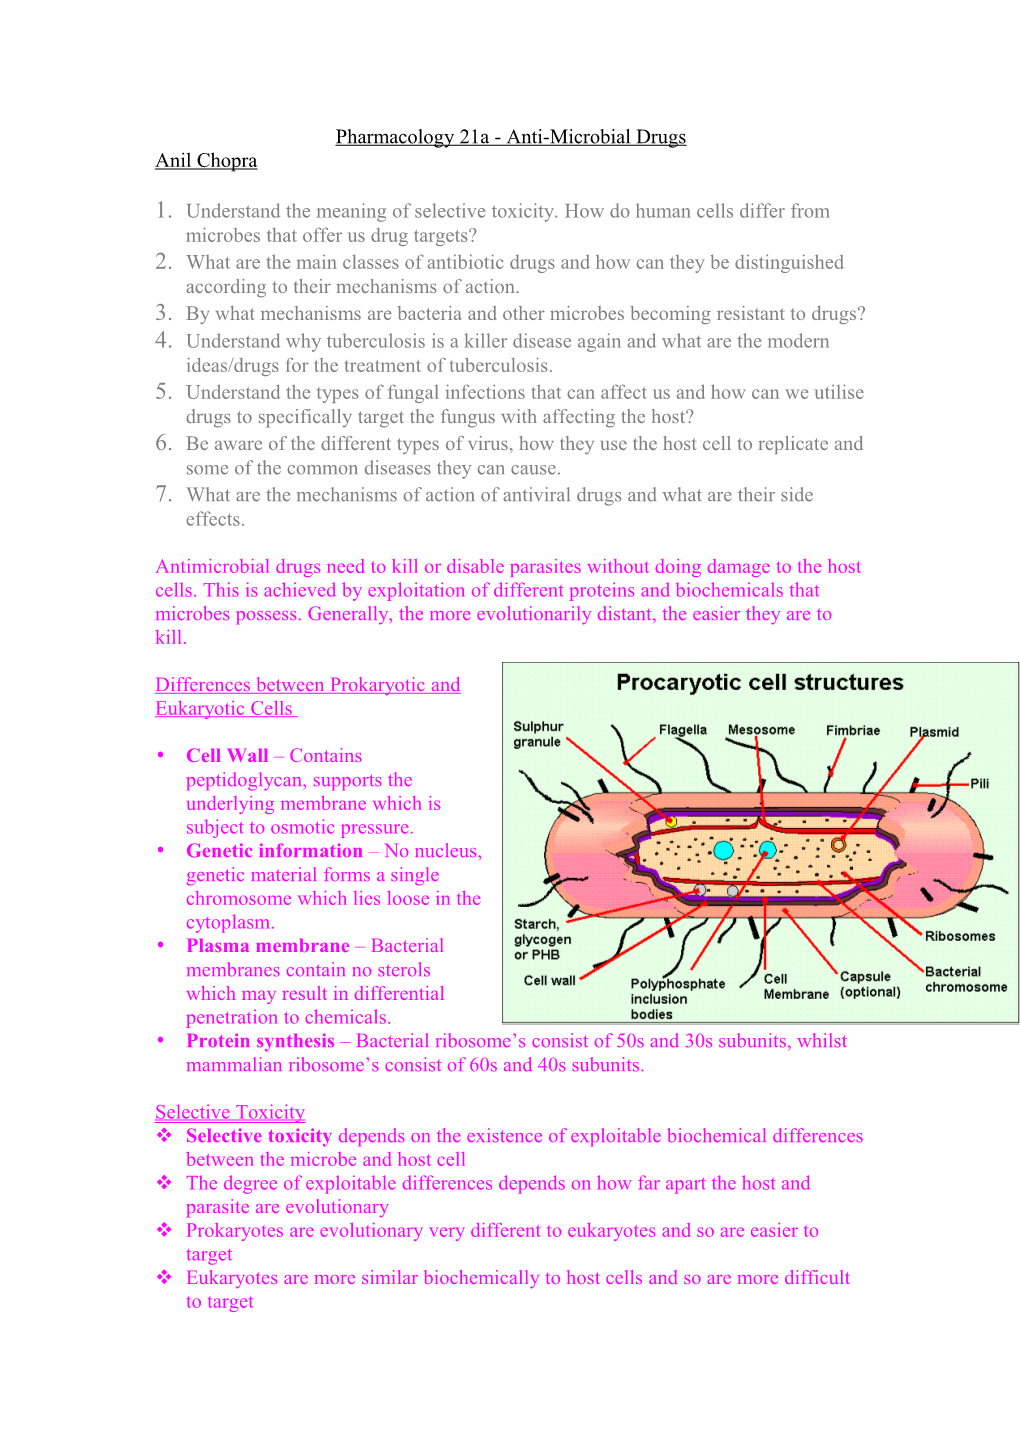 Pharmacology 21A - Anti-Microbial Drugs